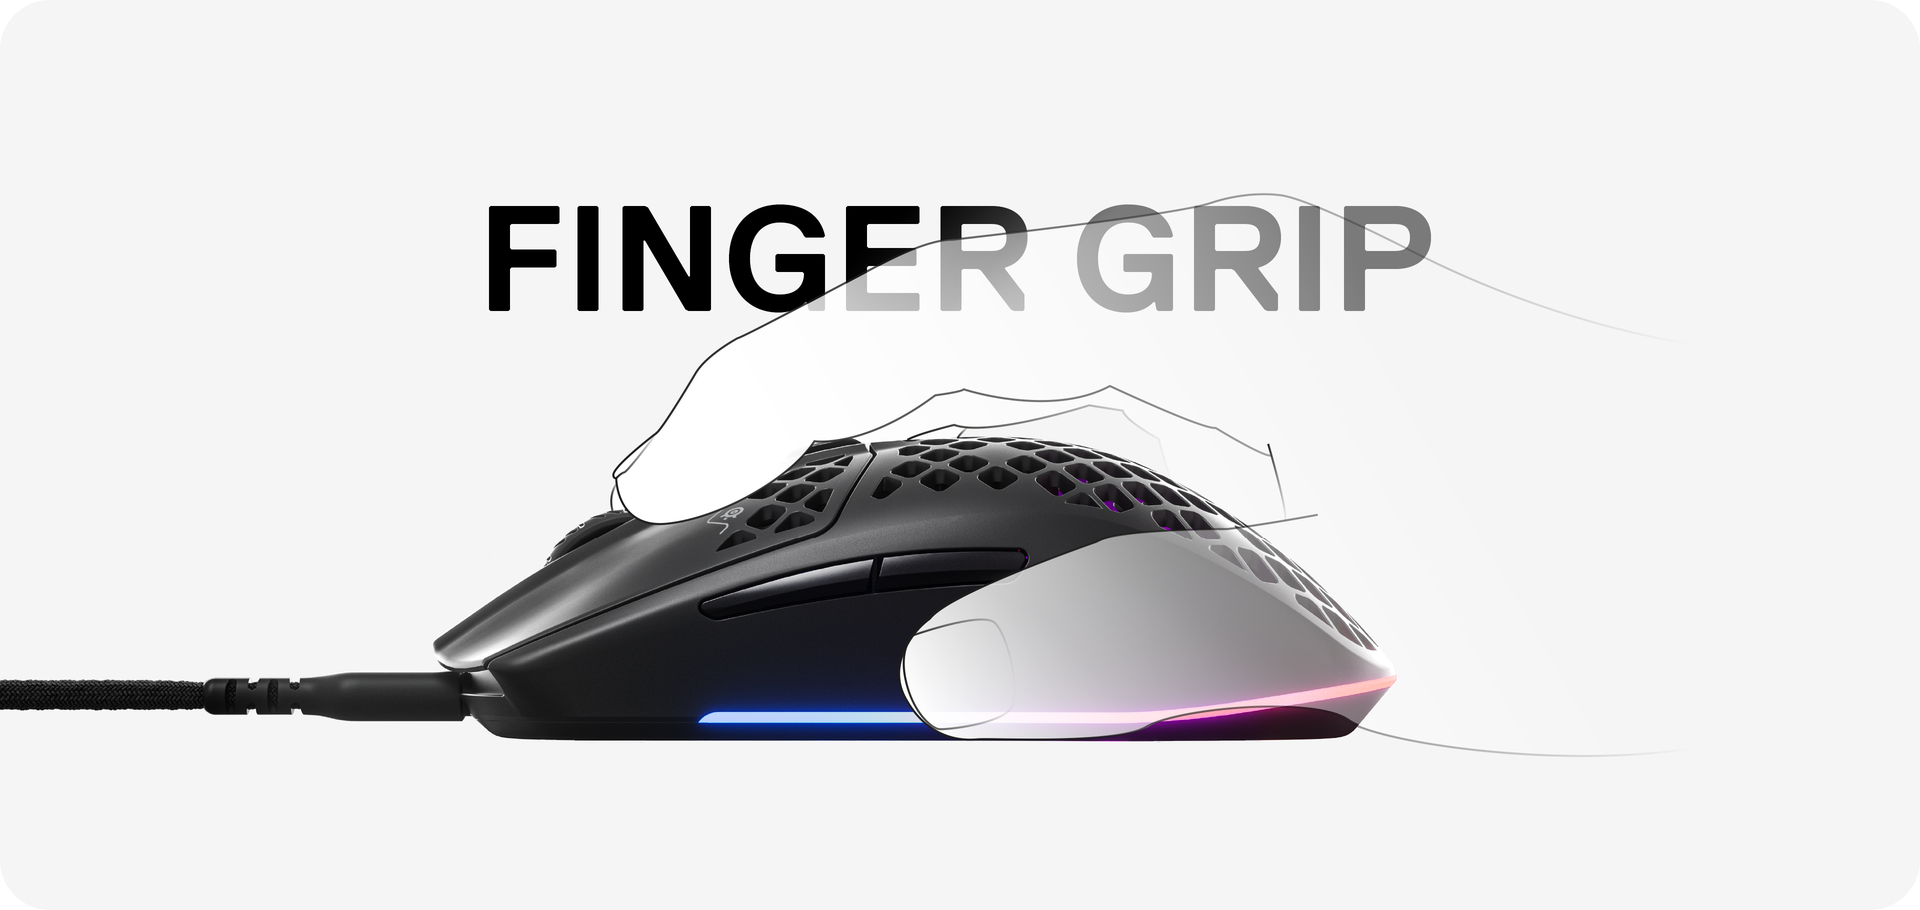 Example of an Aerox 3 2022 gaming mouse being used with a finger grip.